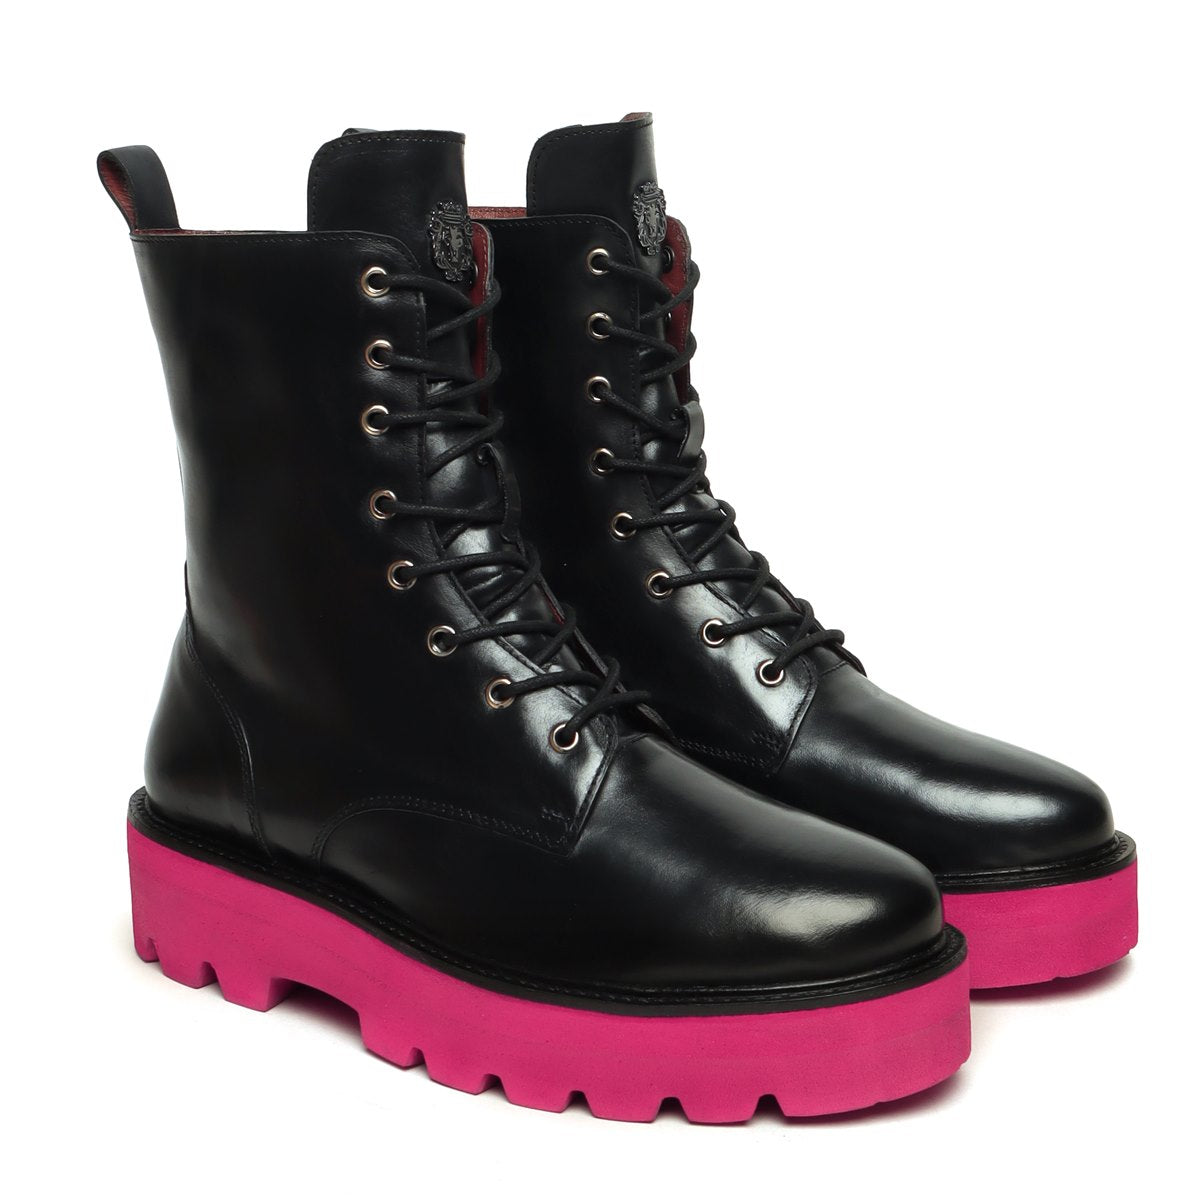 Black Long Lace Up Boots with Pink Sole  By Brune & Bareskin